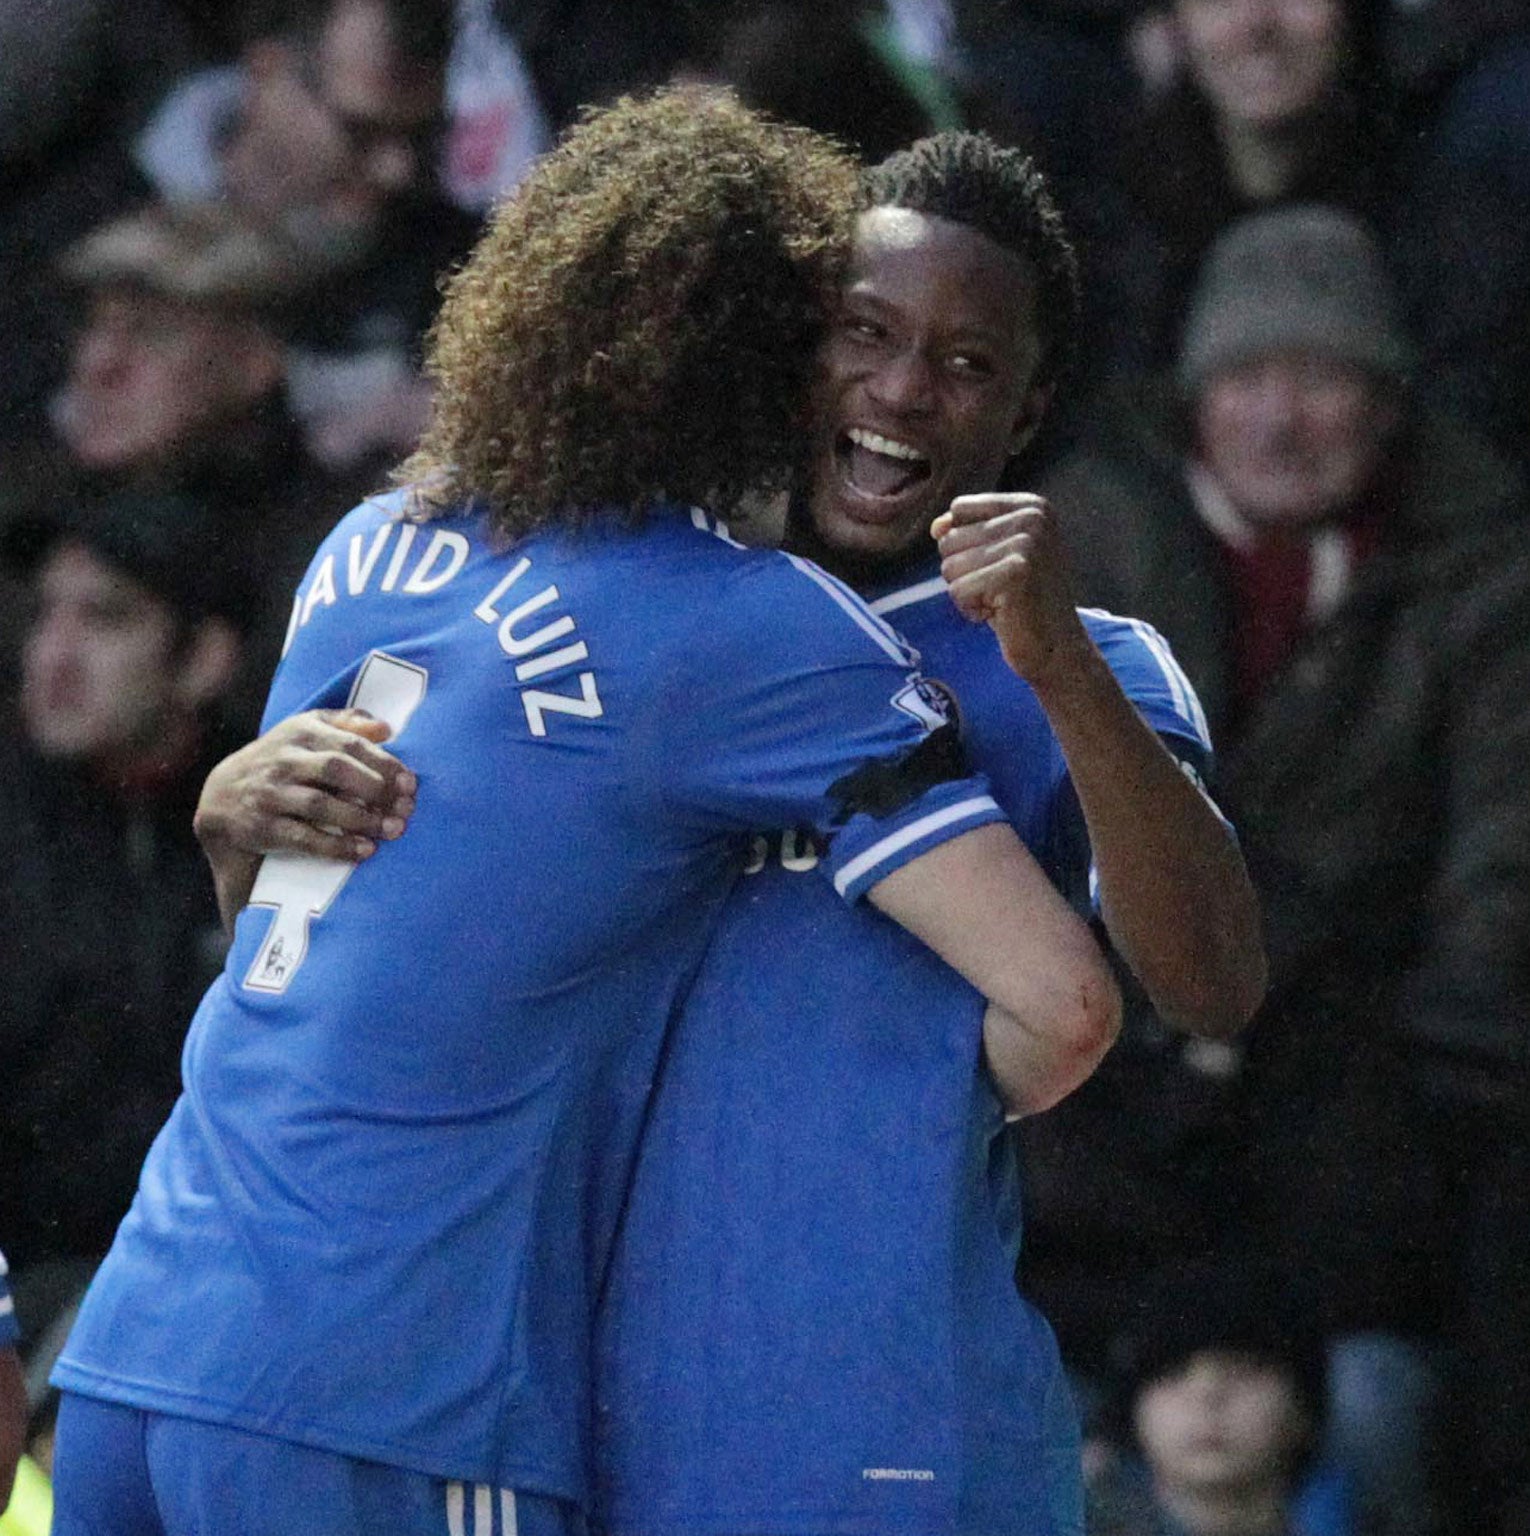 John Obi Mikel celebrates scoring against Derby, but one Blues fan wasn't smiling after Lee Mitchell promised to get the midfielder's name tattooed on his bum if he scored